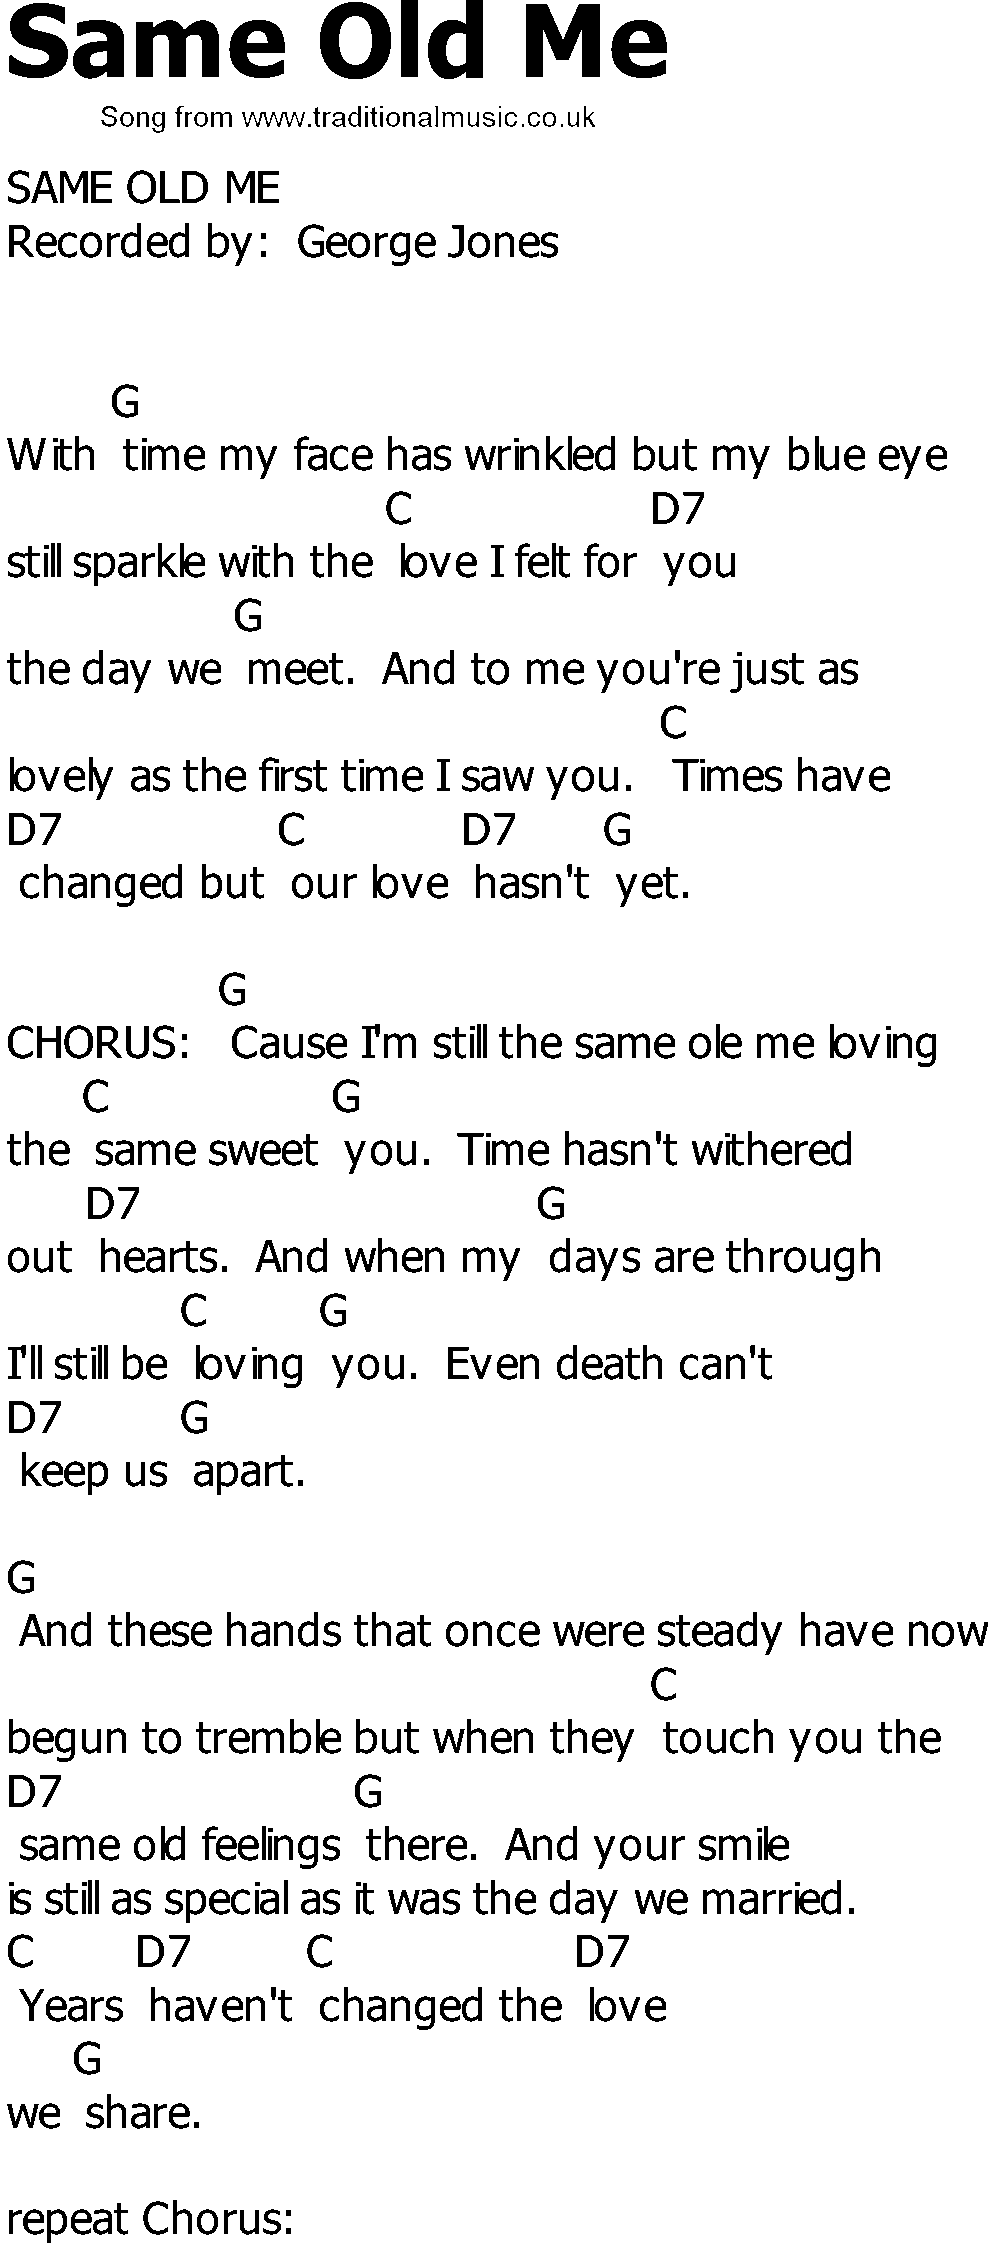 Old Country song lyrics with chords - Same Old Me